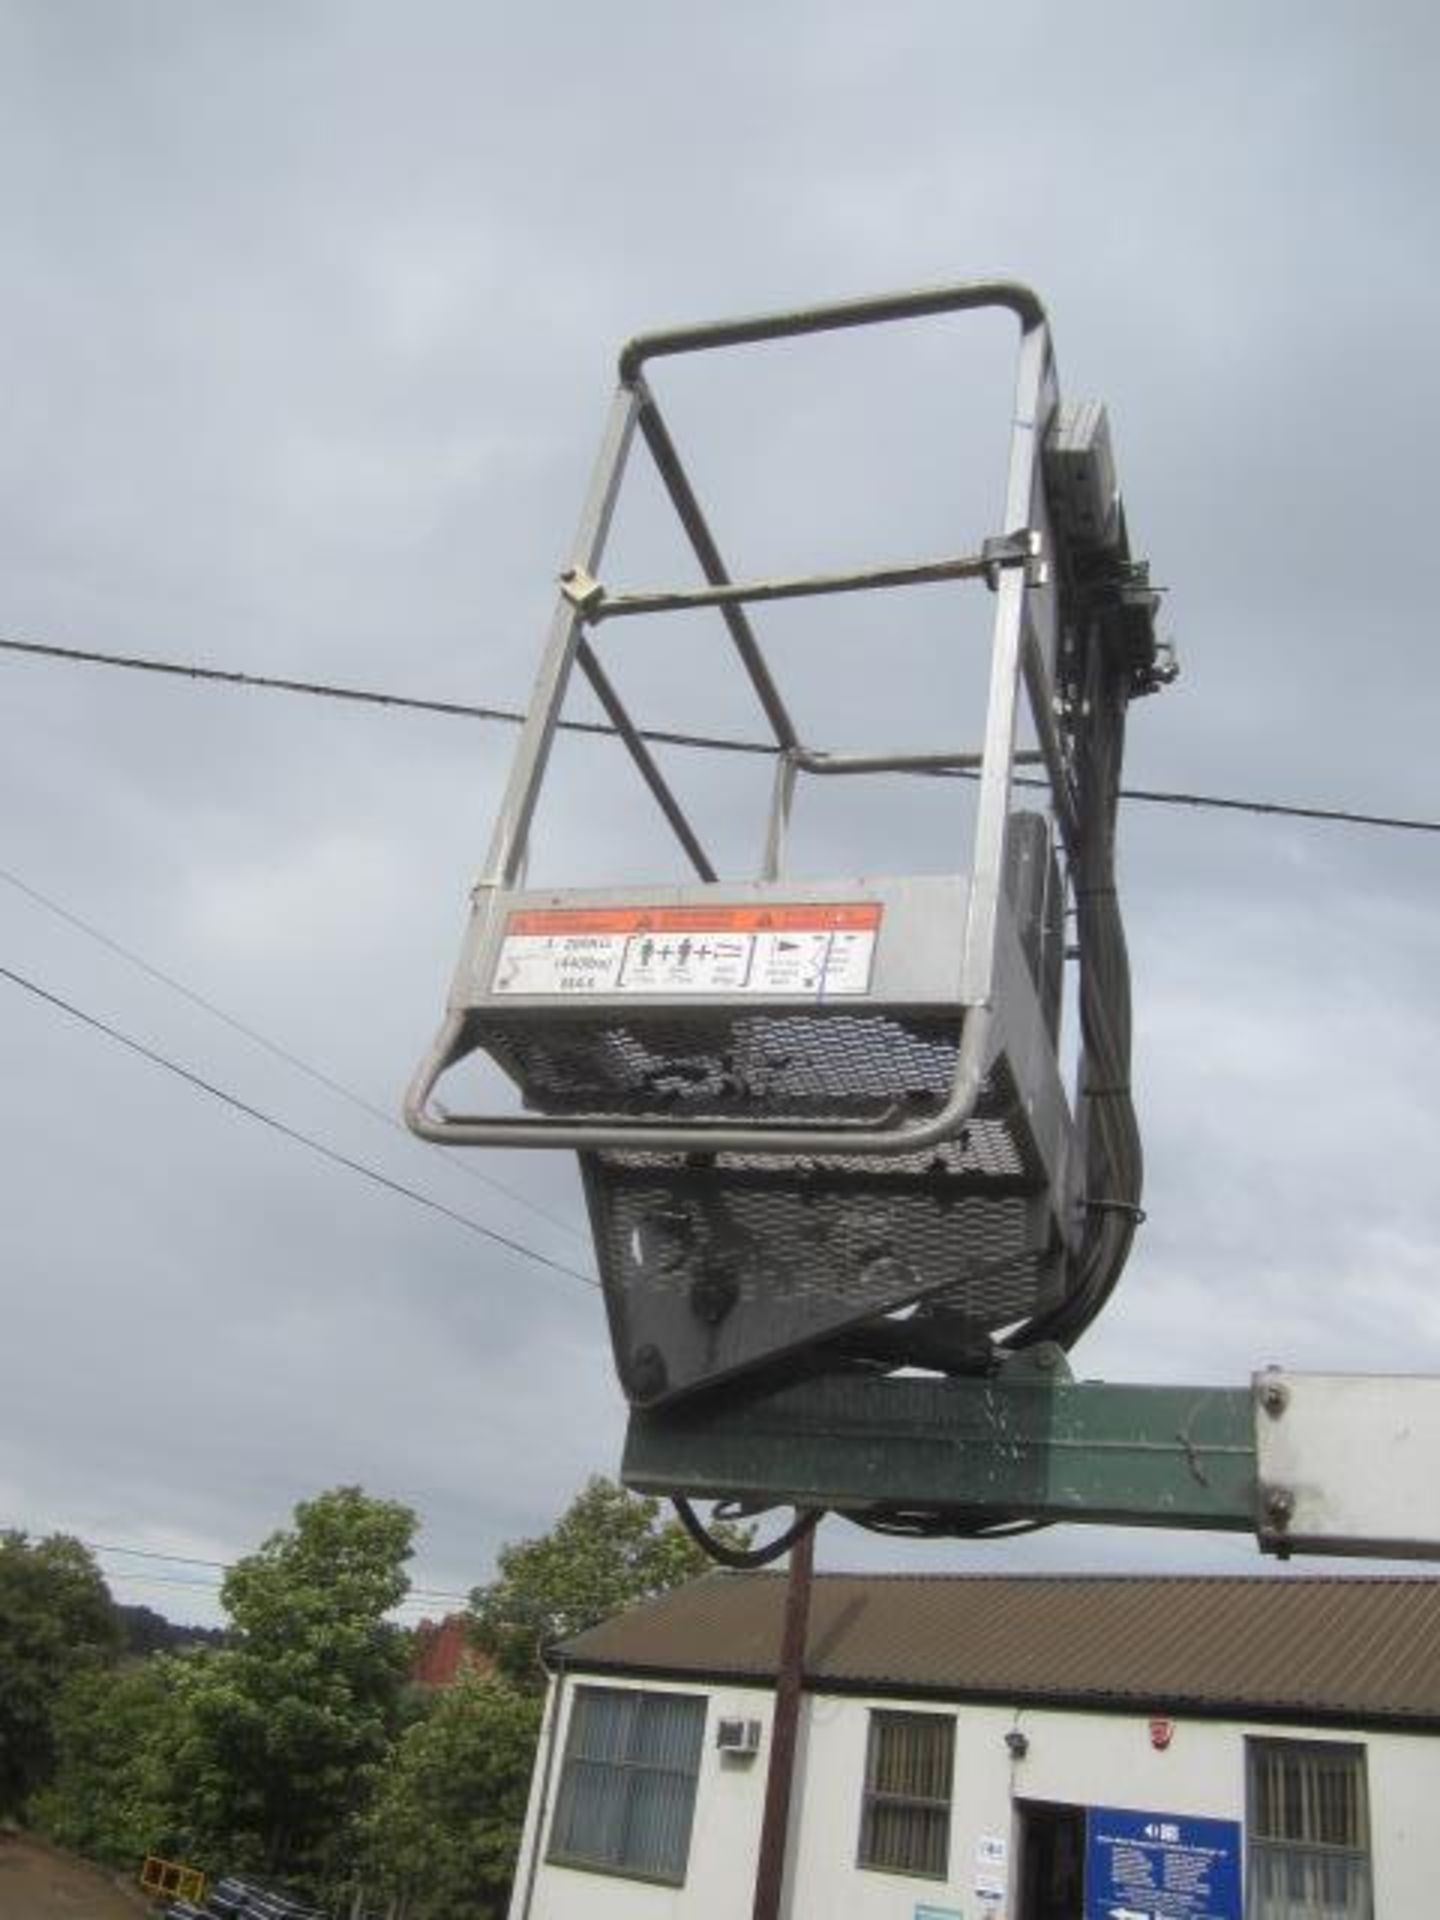 Nifty Lift HR12 battery powered cherry picker, serial no. 122121 (1992), rated load 2 person/ - Image 5 of 8